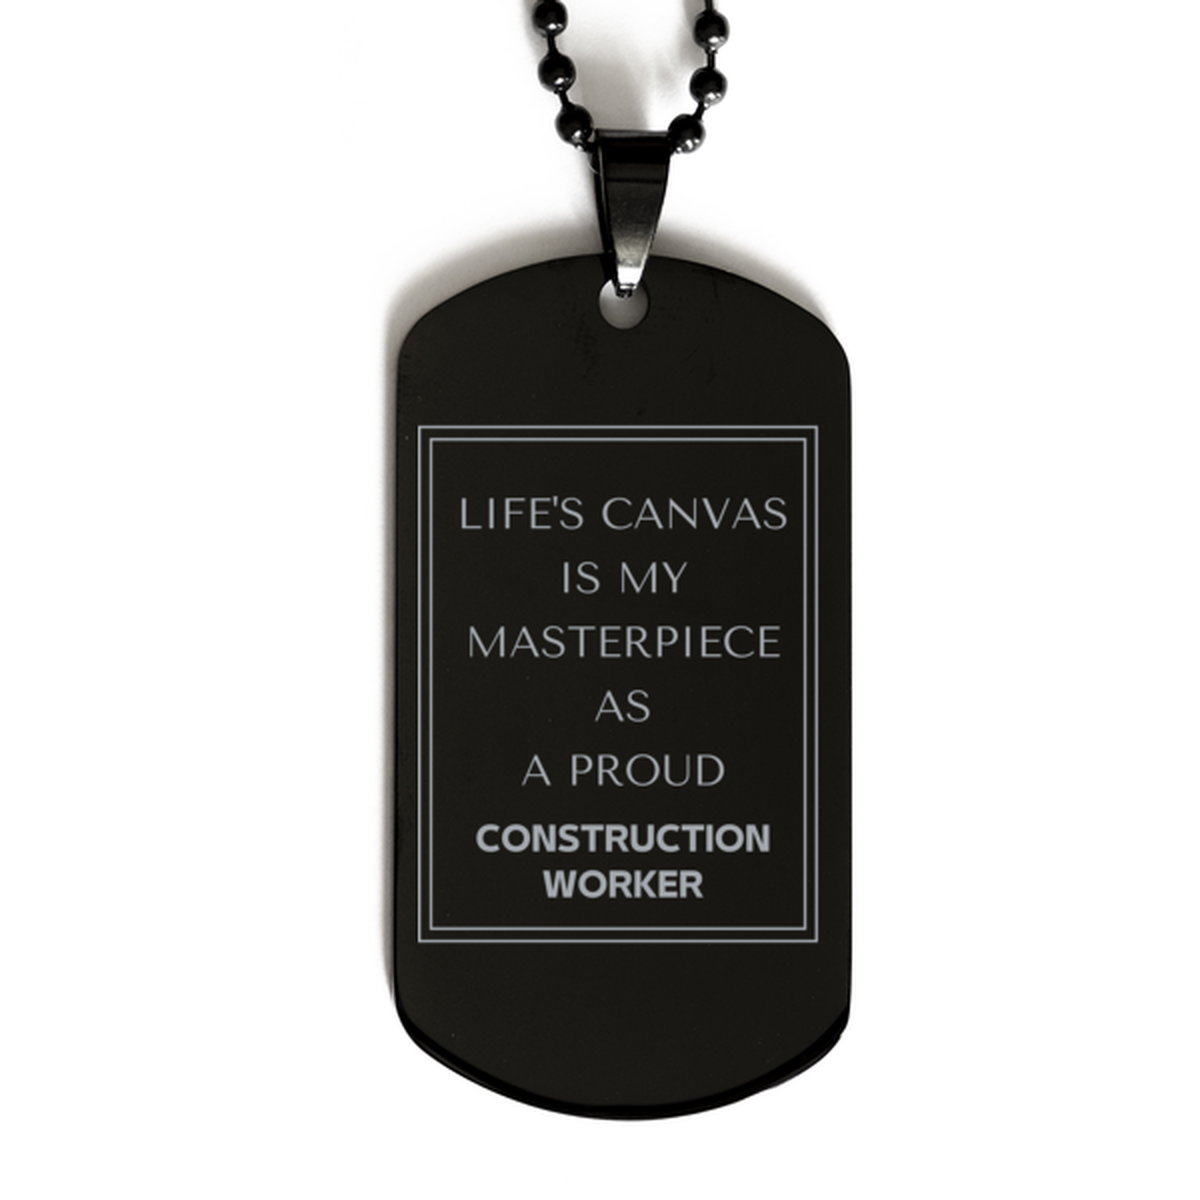 Proud Construction Worker Gifts, Life's canvas is my masterpiece, Epic Birthday Christmas Unique Black Dog Tag For Construction Worker, Coworkers, Men, Women, Friends